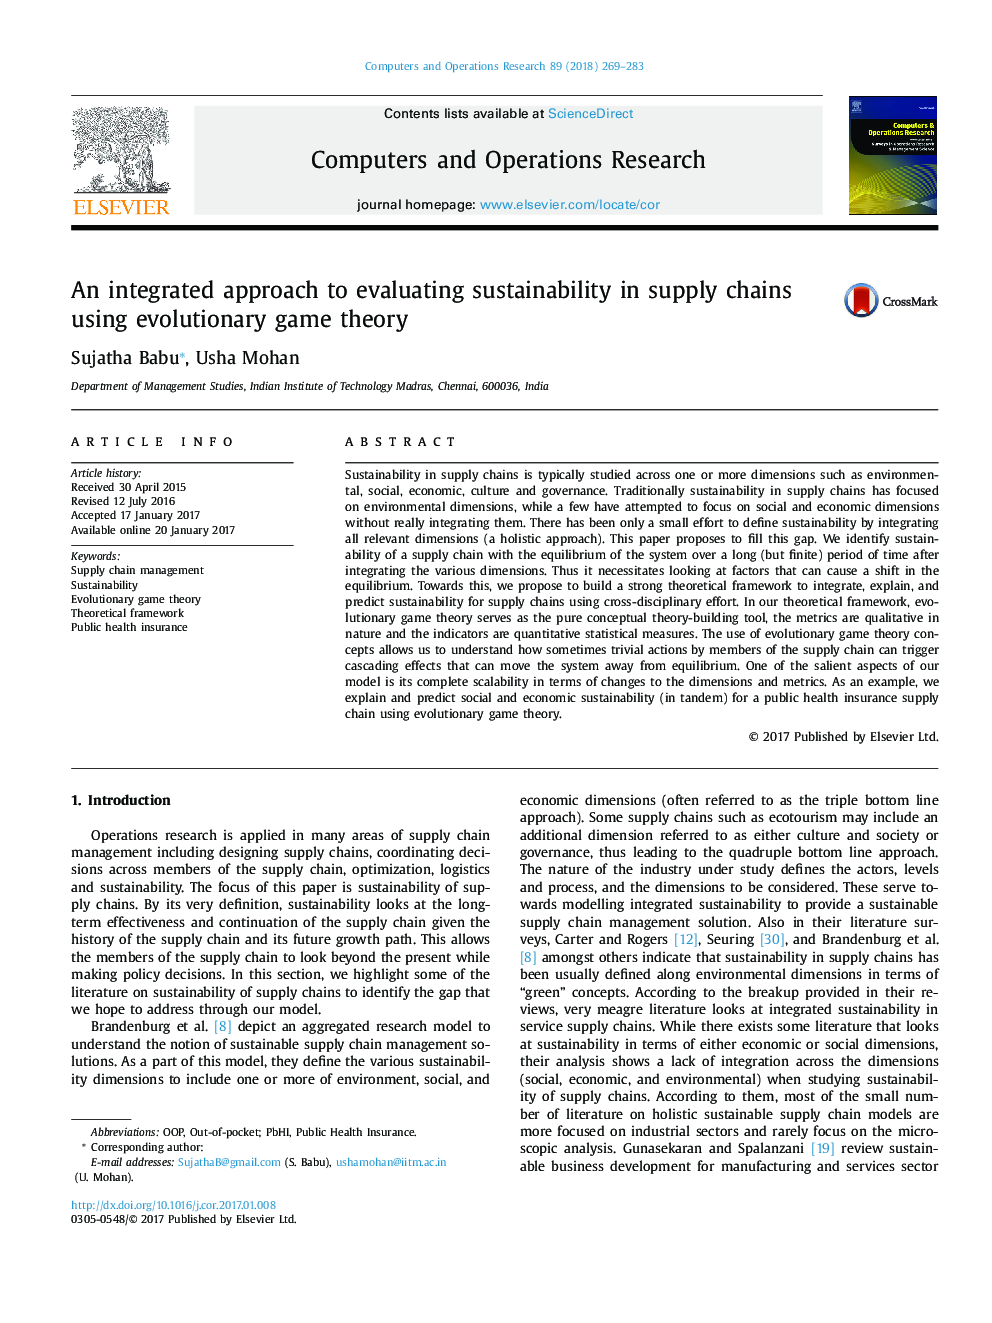 An integrated approach to evaluating sustainability in supply chains using evolutionary game theory